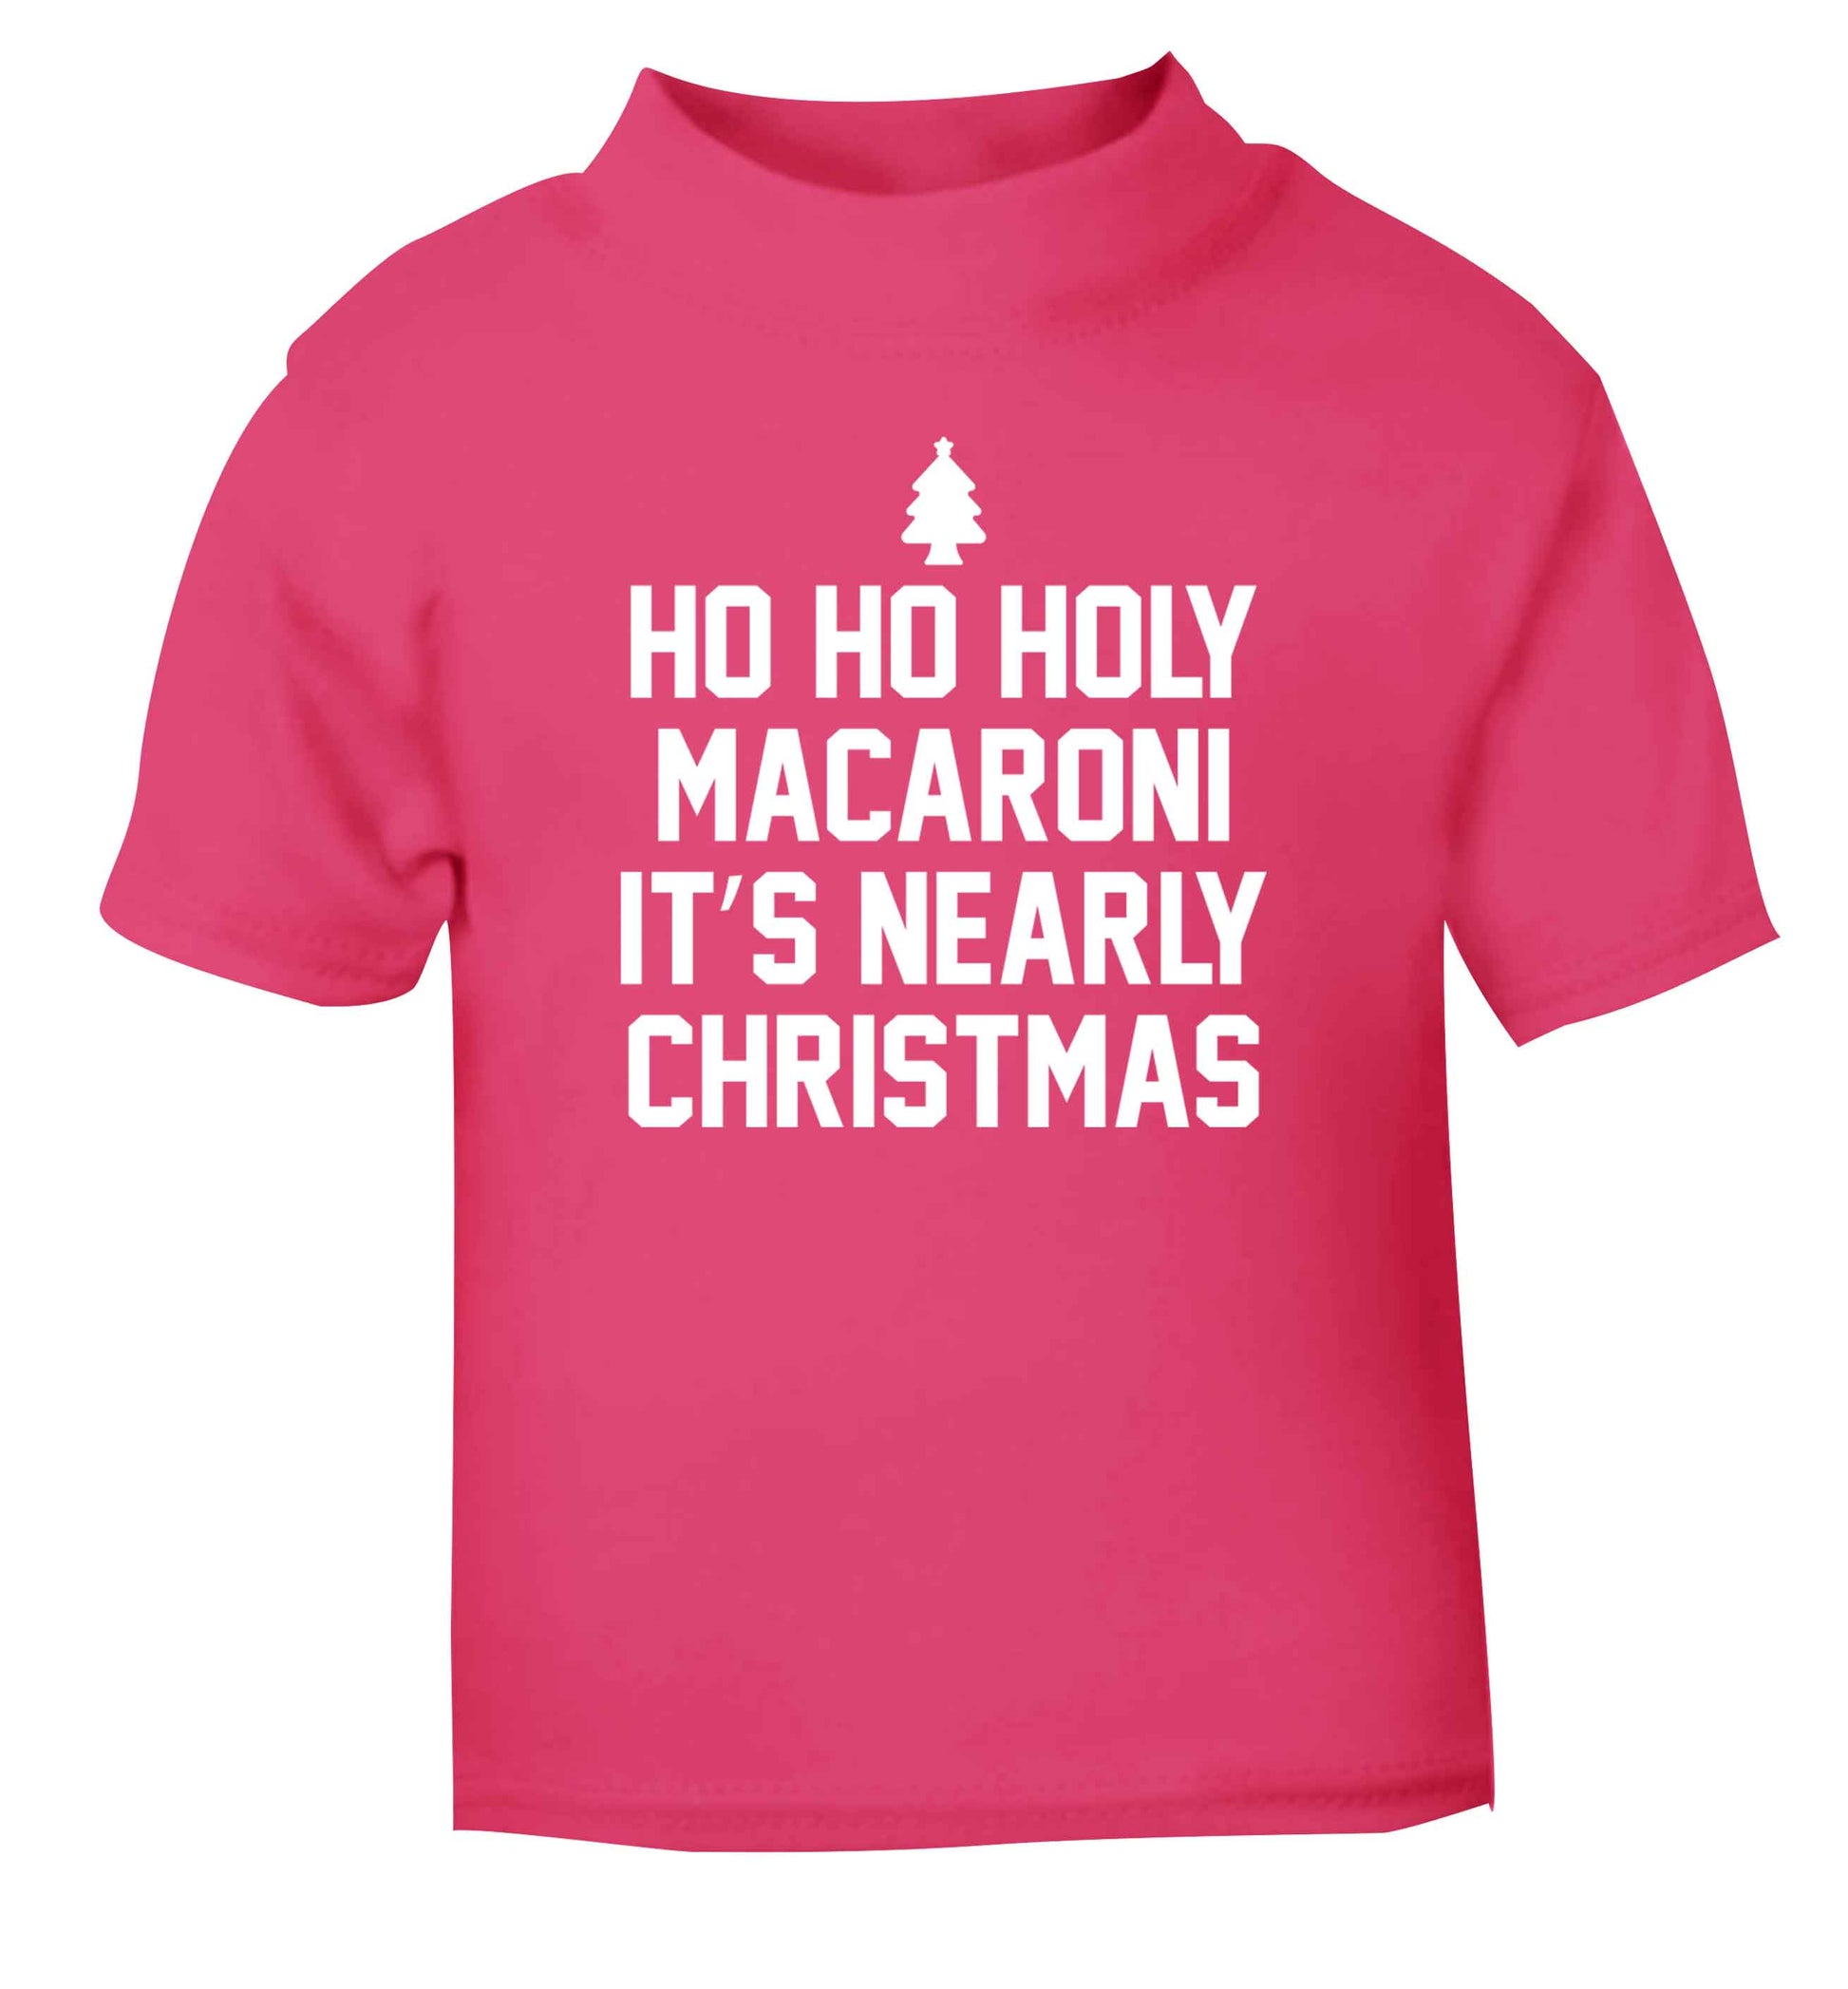 Ho ho holy macaroni it's nearly Christmas pink Baby Toddler Tshirt 2 Years